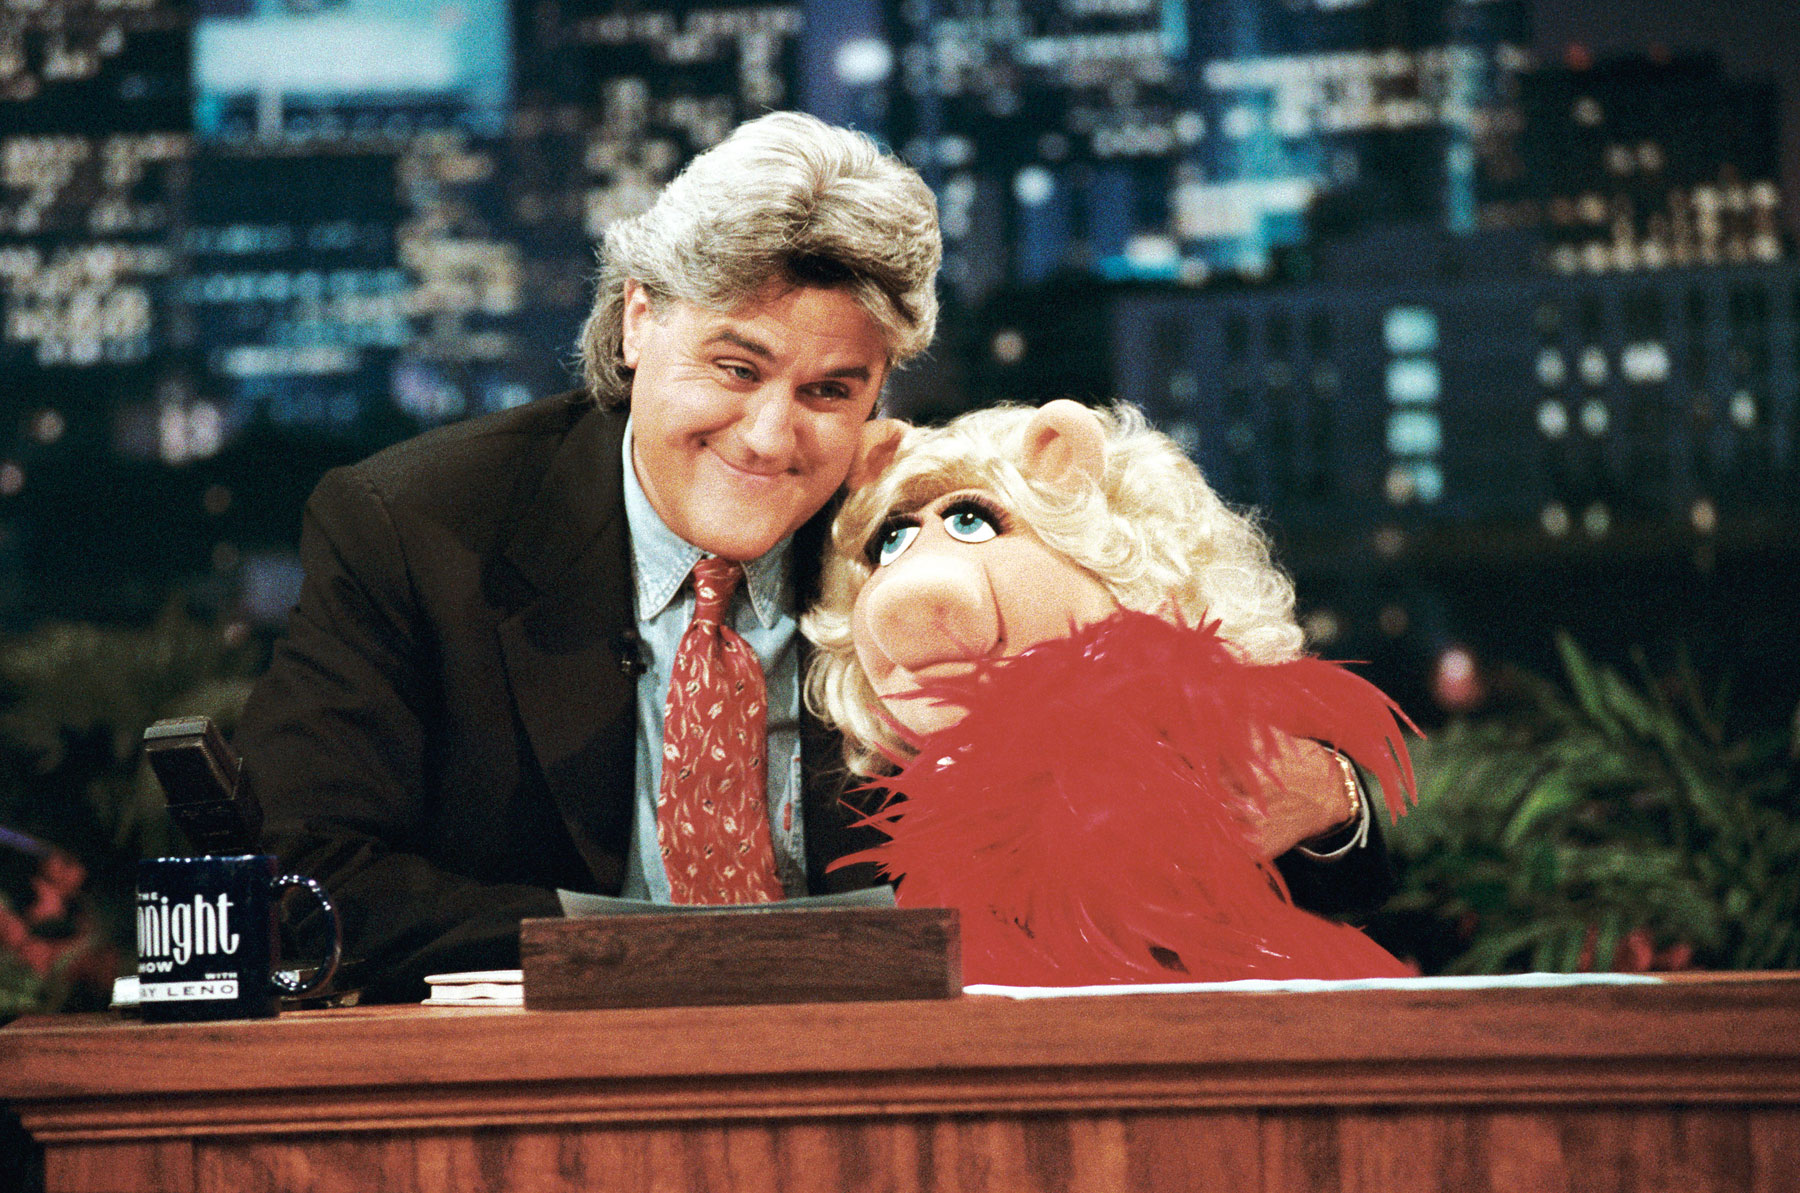 Jay Leno interviews Miss Piggy on The Tonight Show on June 21, 1996.